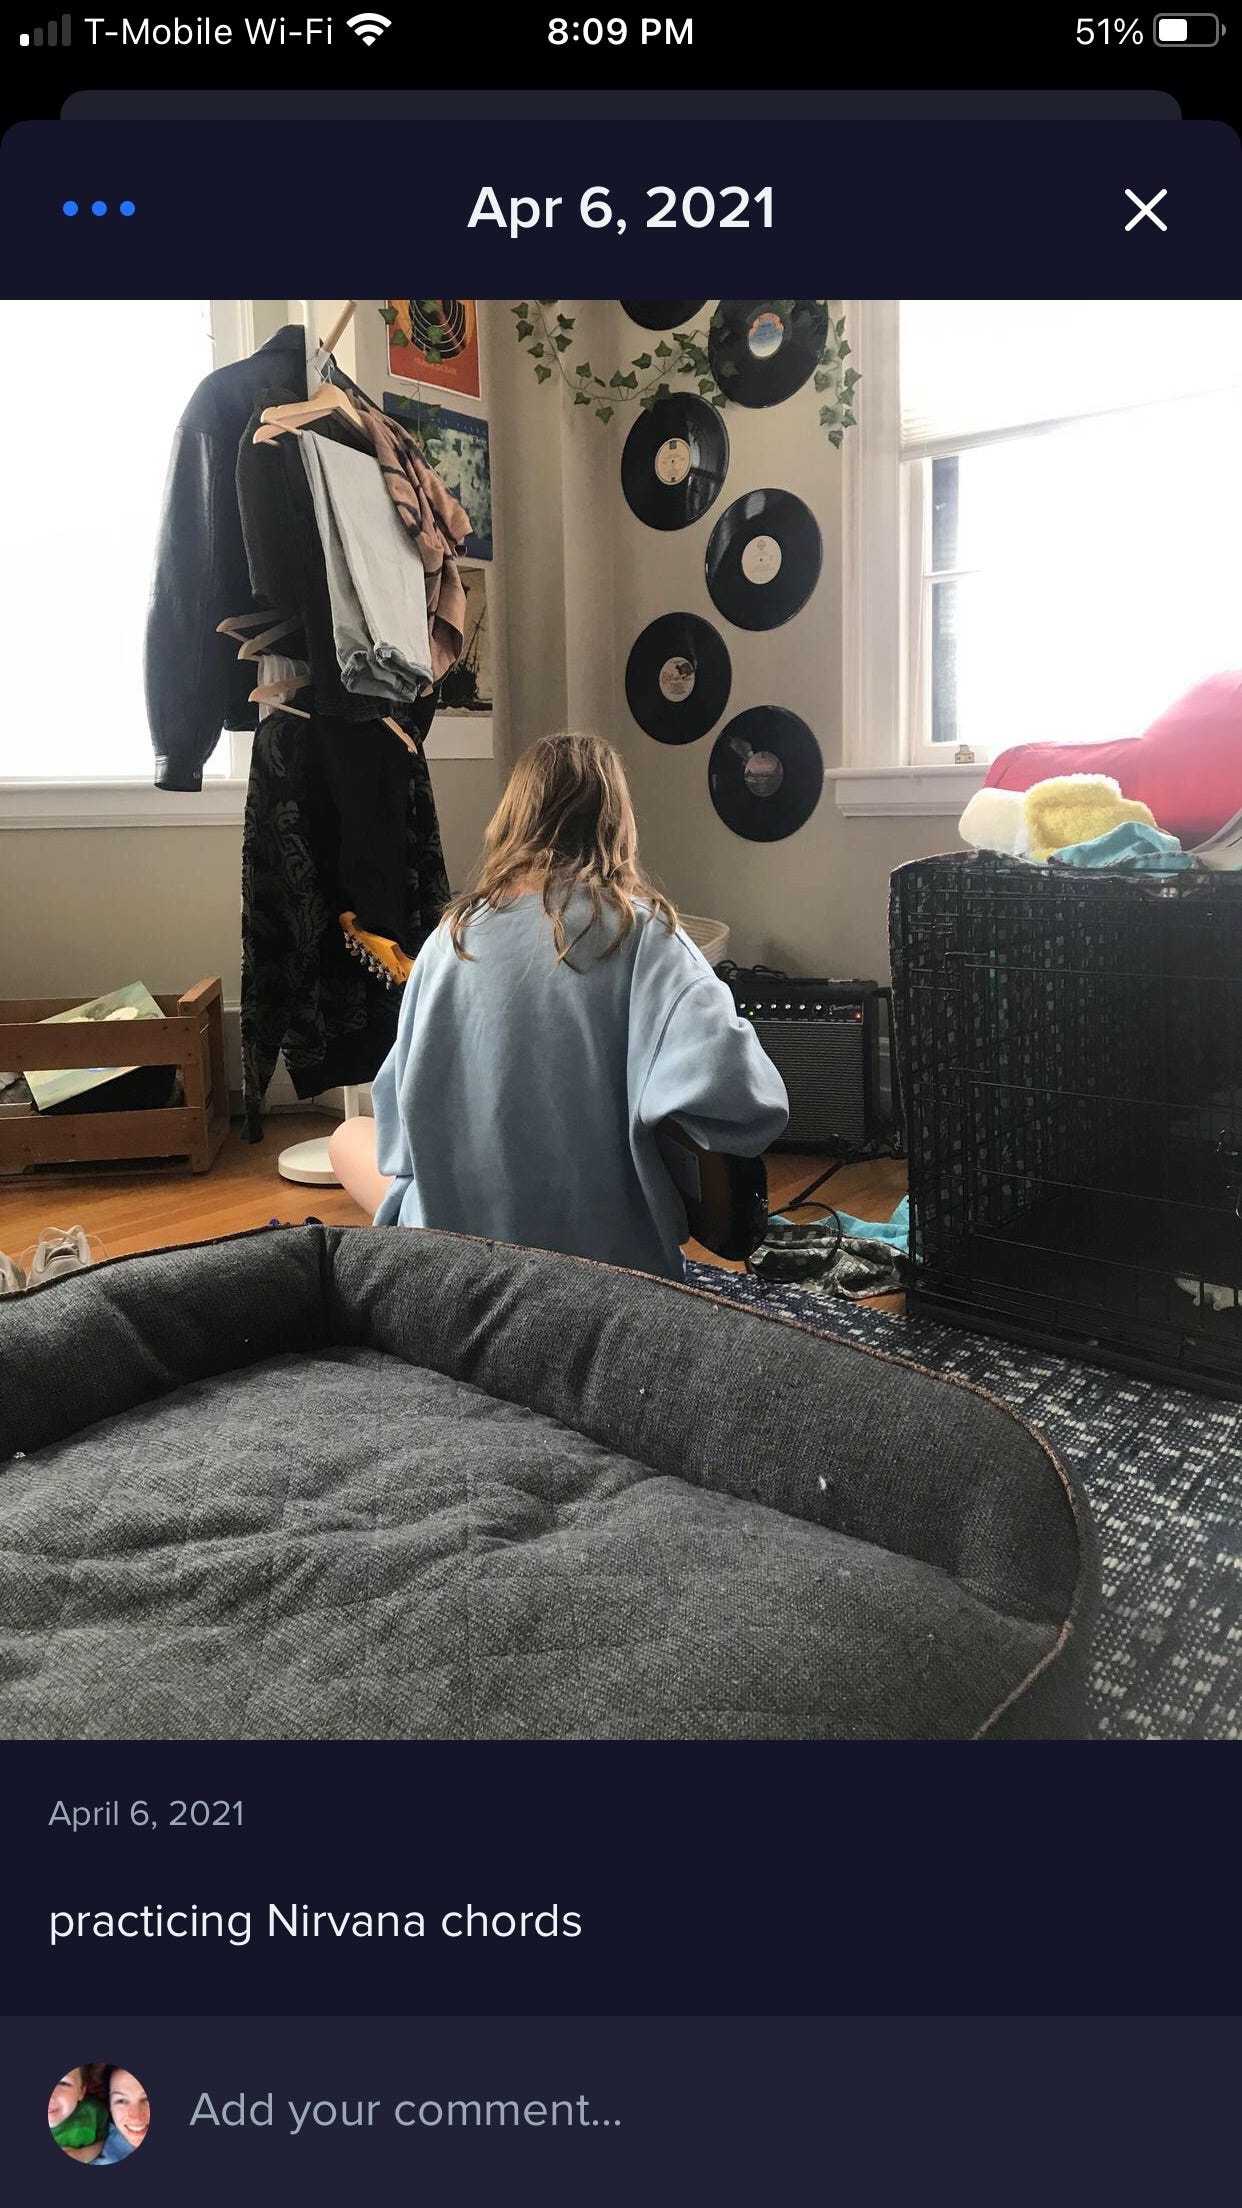 The Notabli app captures an image of a teenager, seated with her back to the camera, electric guitar in hand, surrounded by her messy room with dog bed, records on the walls, climbing vines, and articles of clothing.